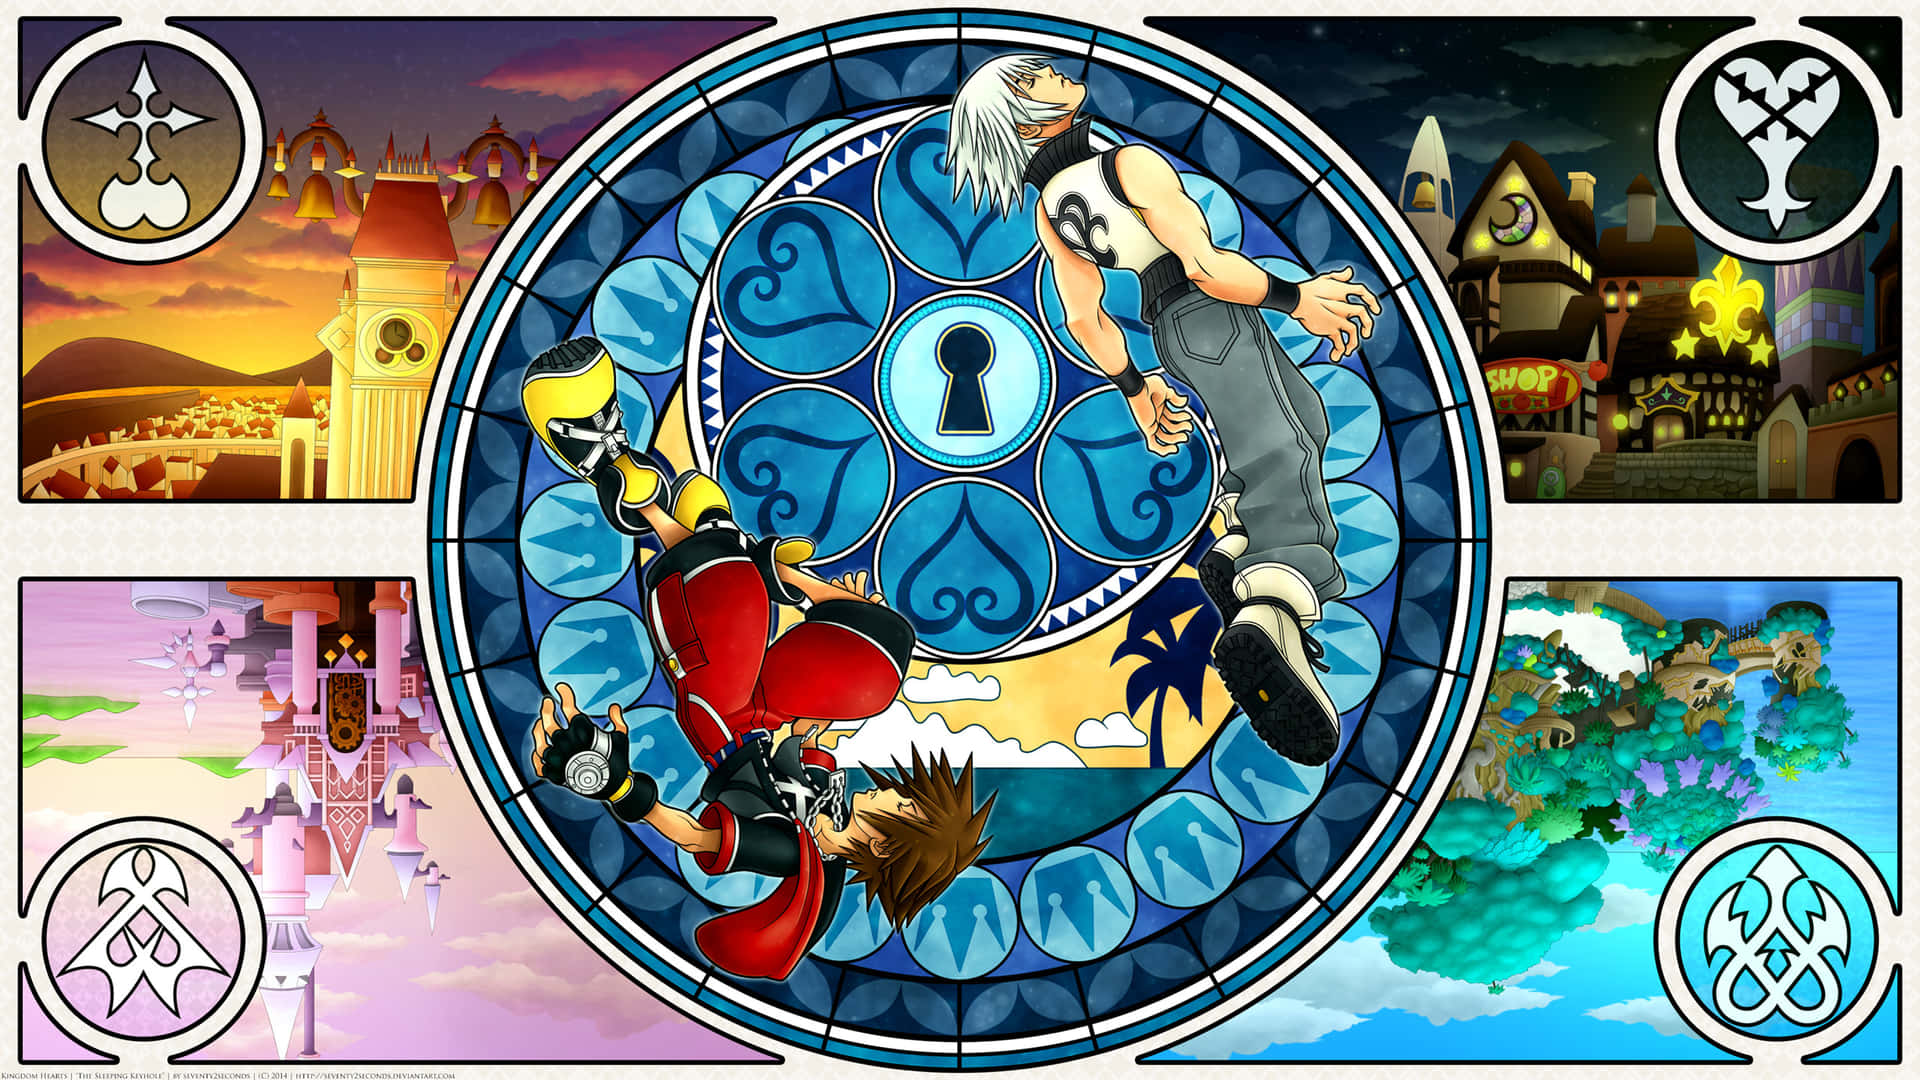 Riku from Kingdom Hearts strikes a powerful pose in an intense action scene. Wallpaper